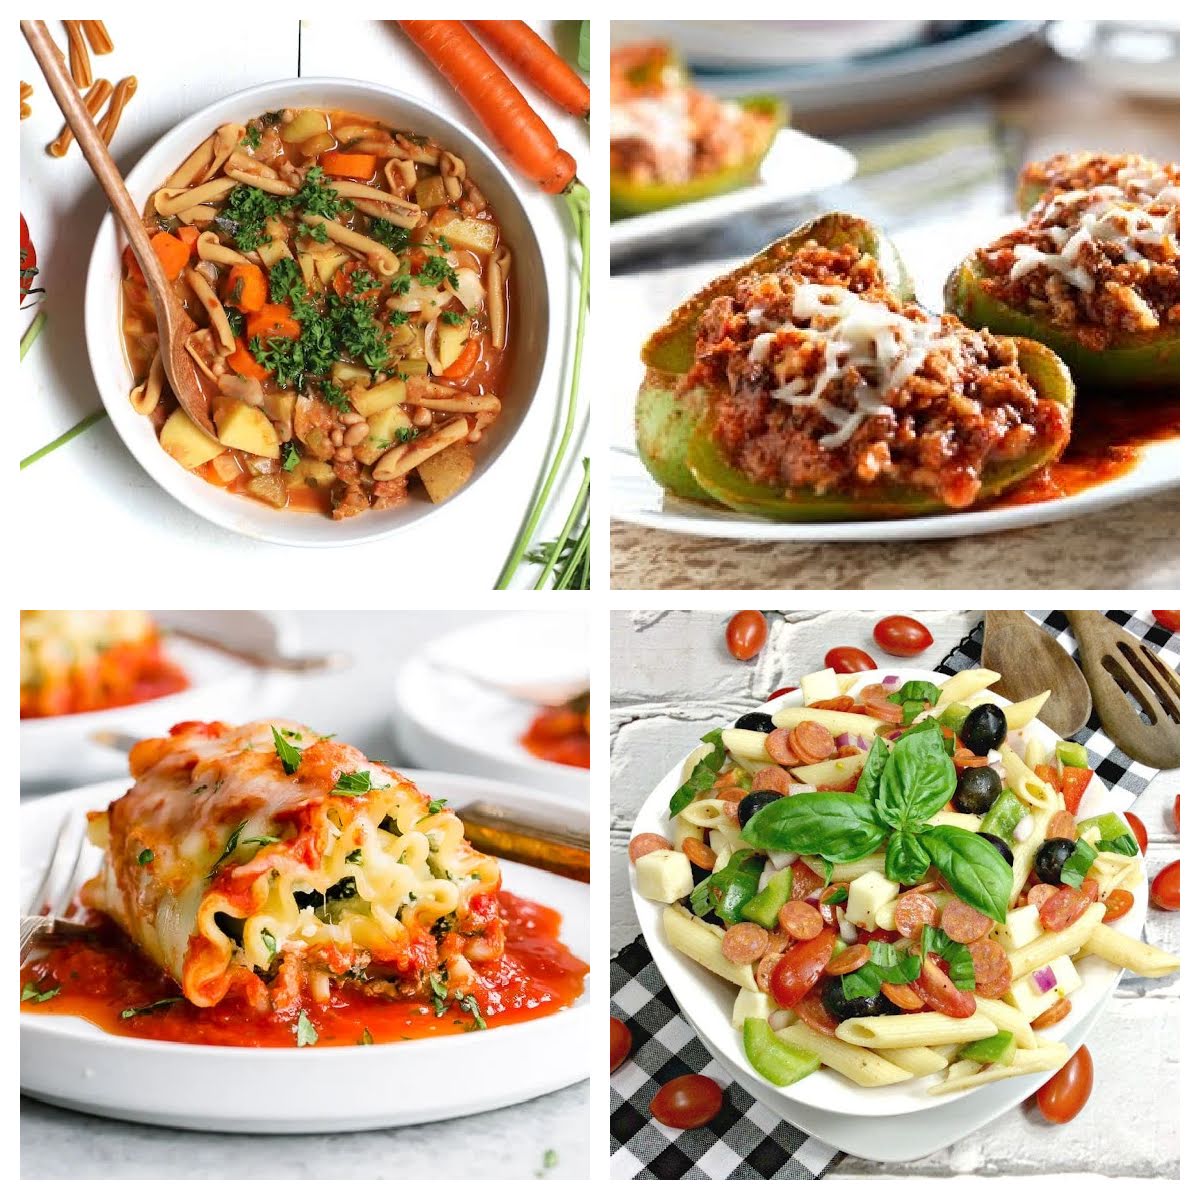 Italian meals in a collage.